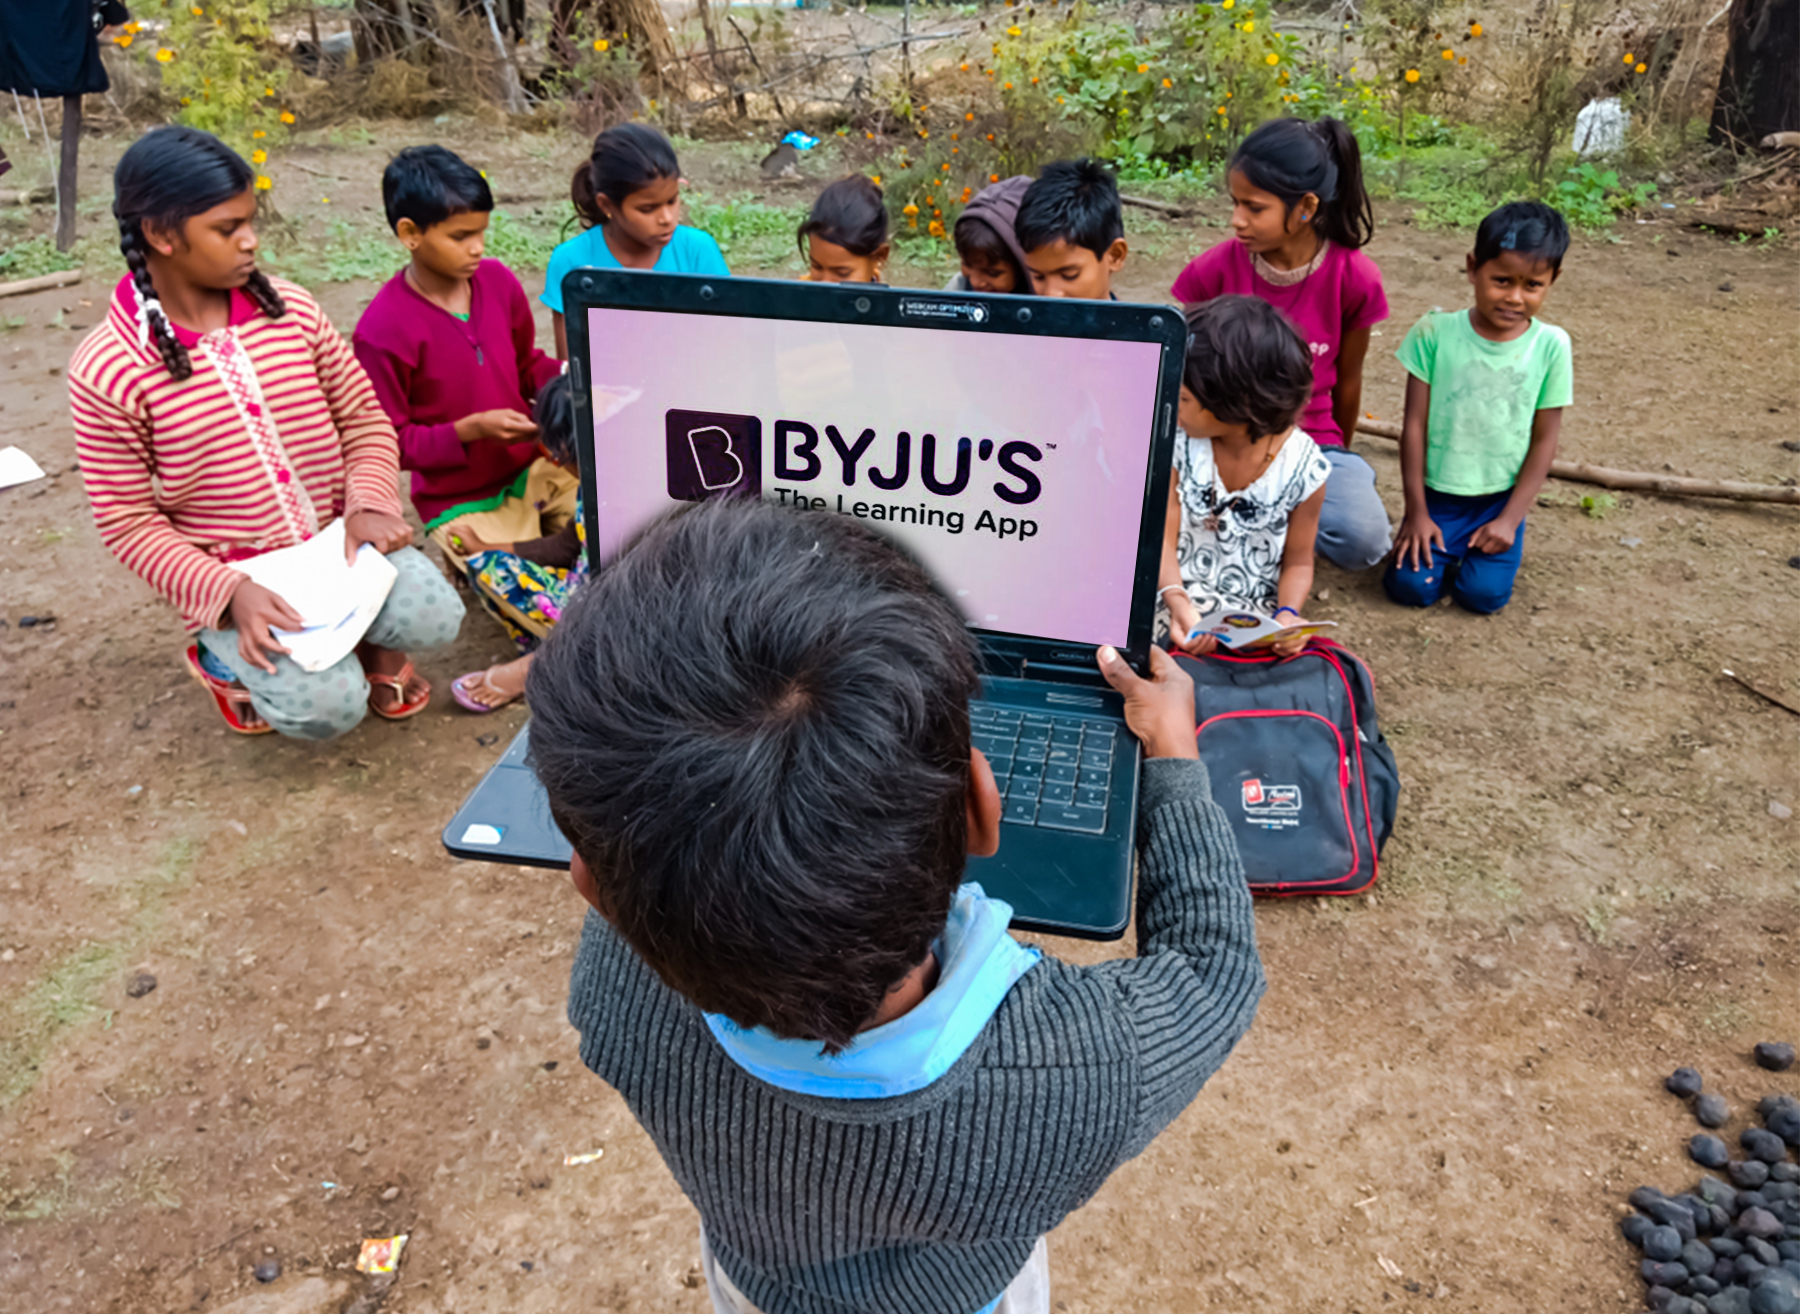 AISA condemns the BYJU’S company’s acts of cheating Indian parents